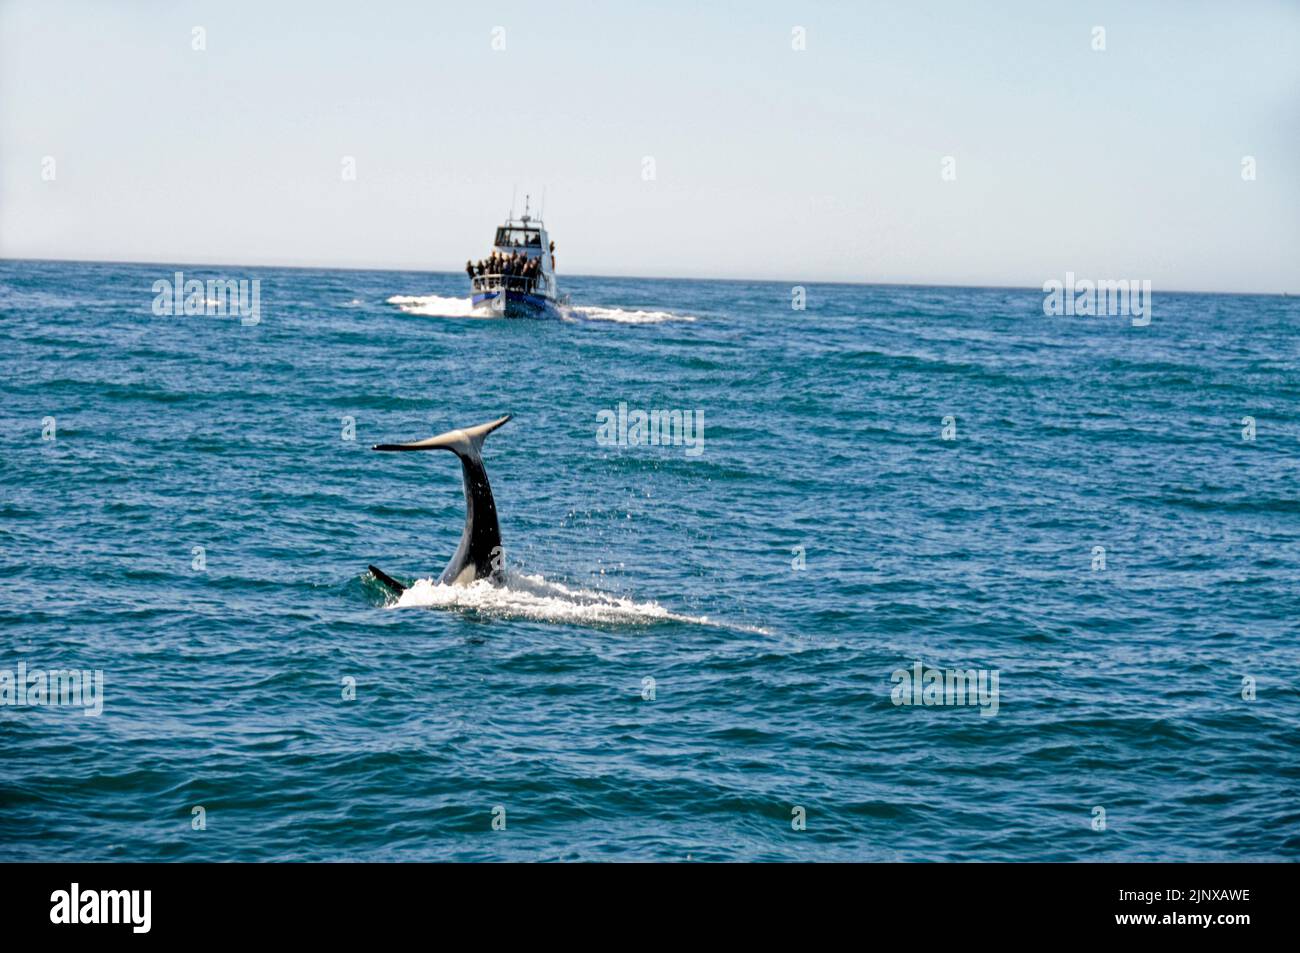 A Dolphin Watch boat with a party of tourists on board spots an Orca or killer Whale near Kaikoura on the east coast of South Island in New Zealand. Stock Photo